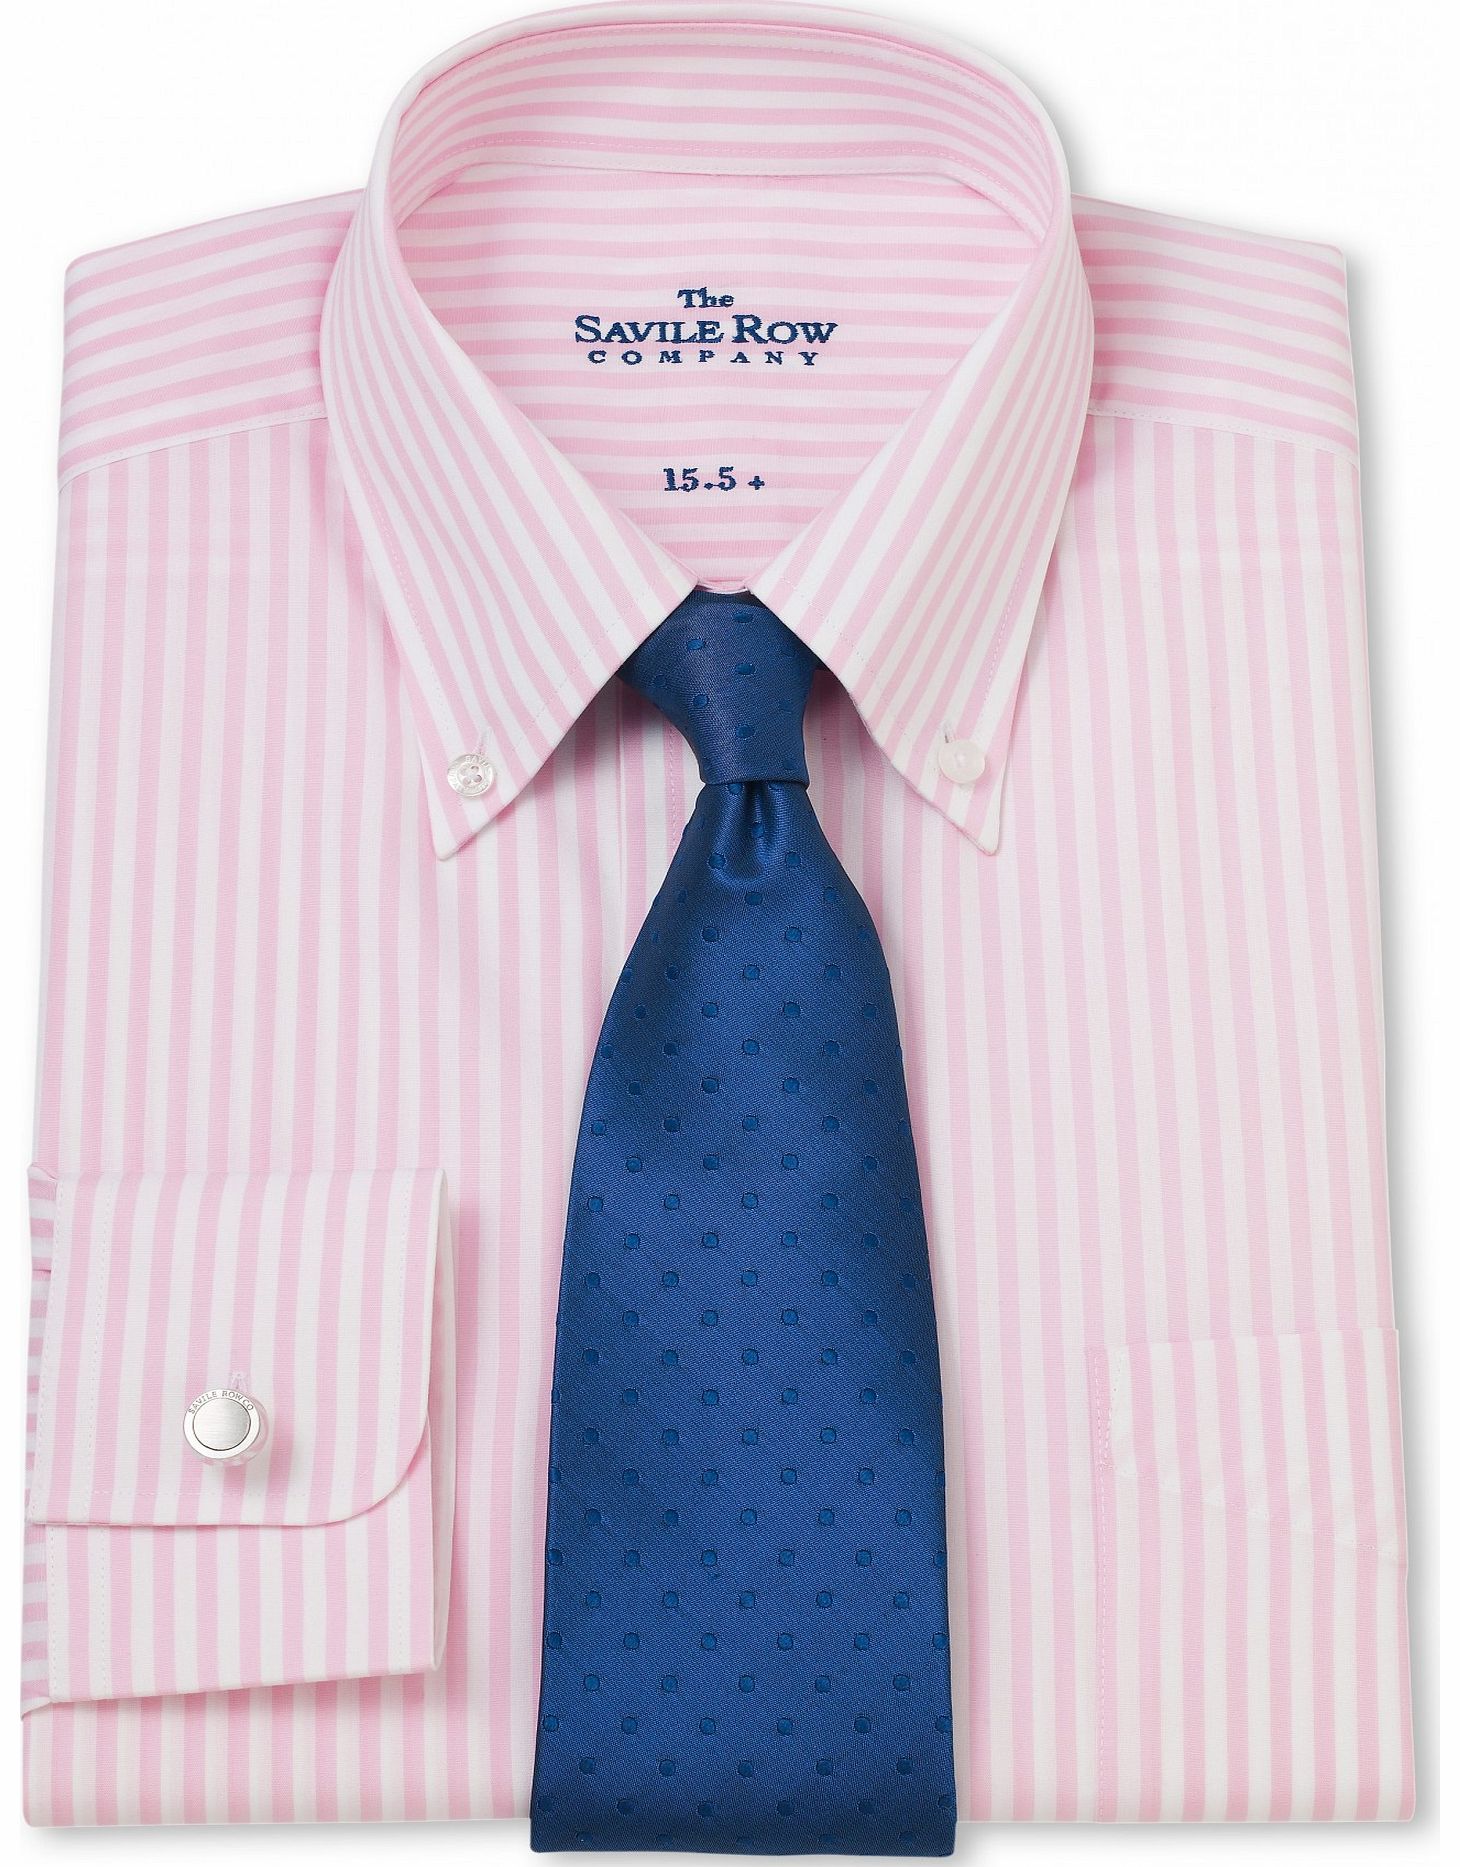 Savile Row Company Pink White Bengal Stripe Button Down Classic Fit